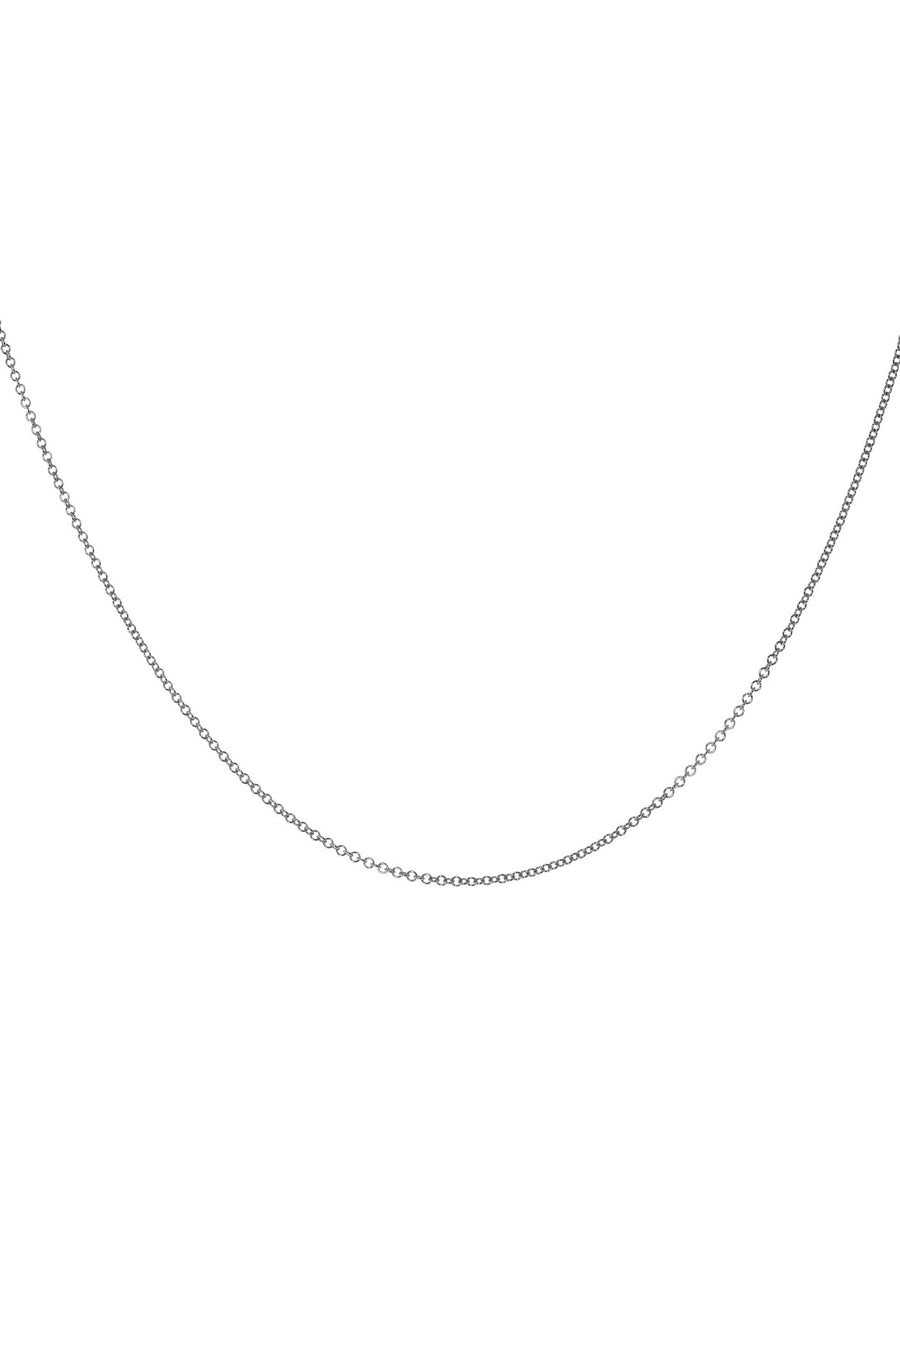 1.3mm Cable Chain in 14k Gold  | 18"